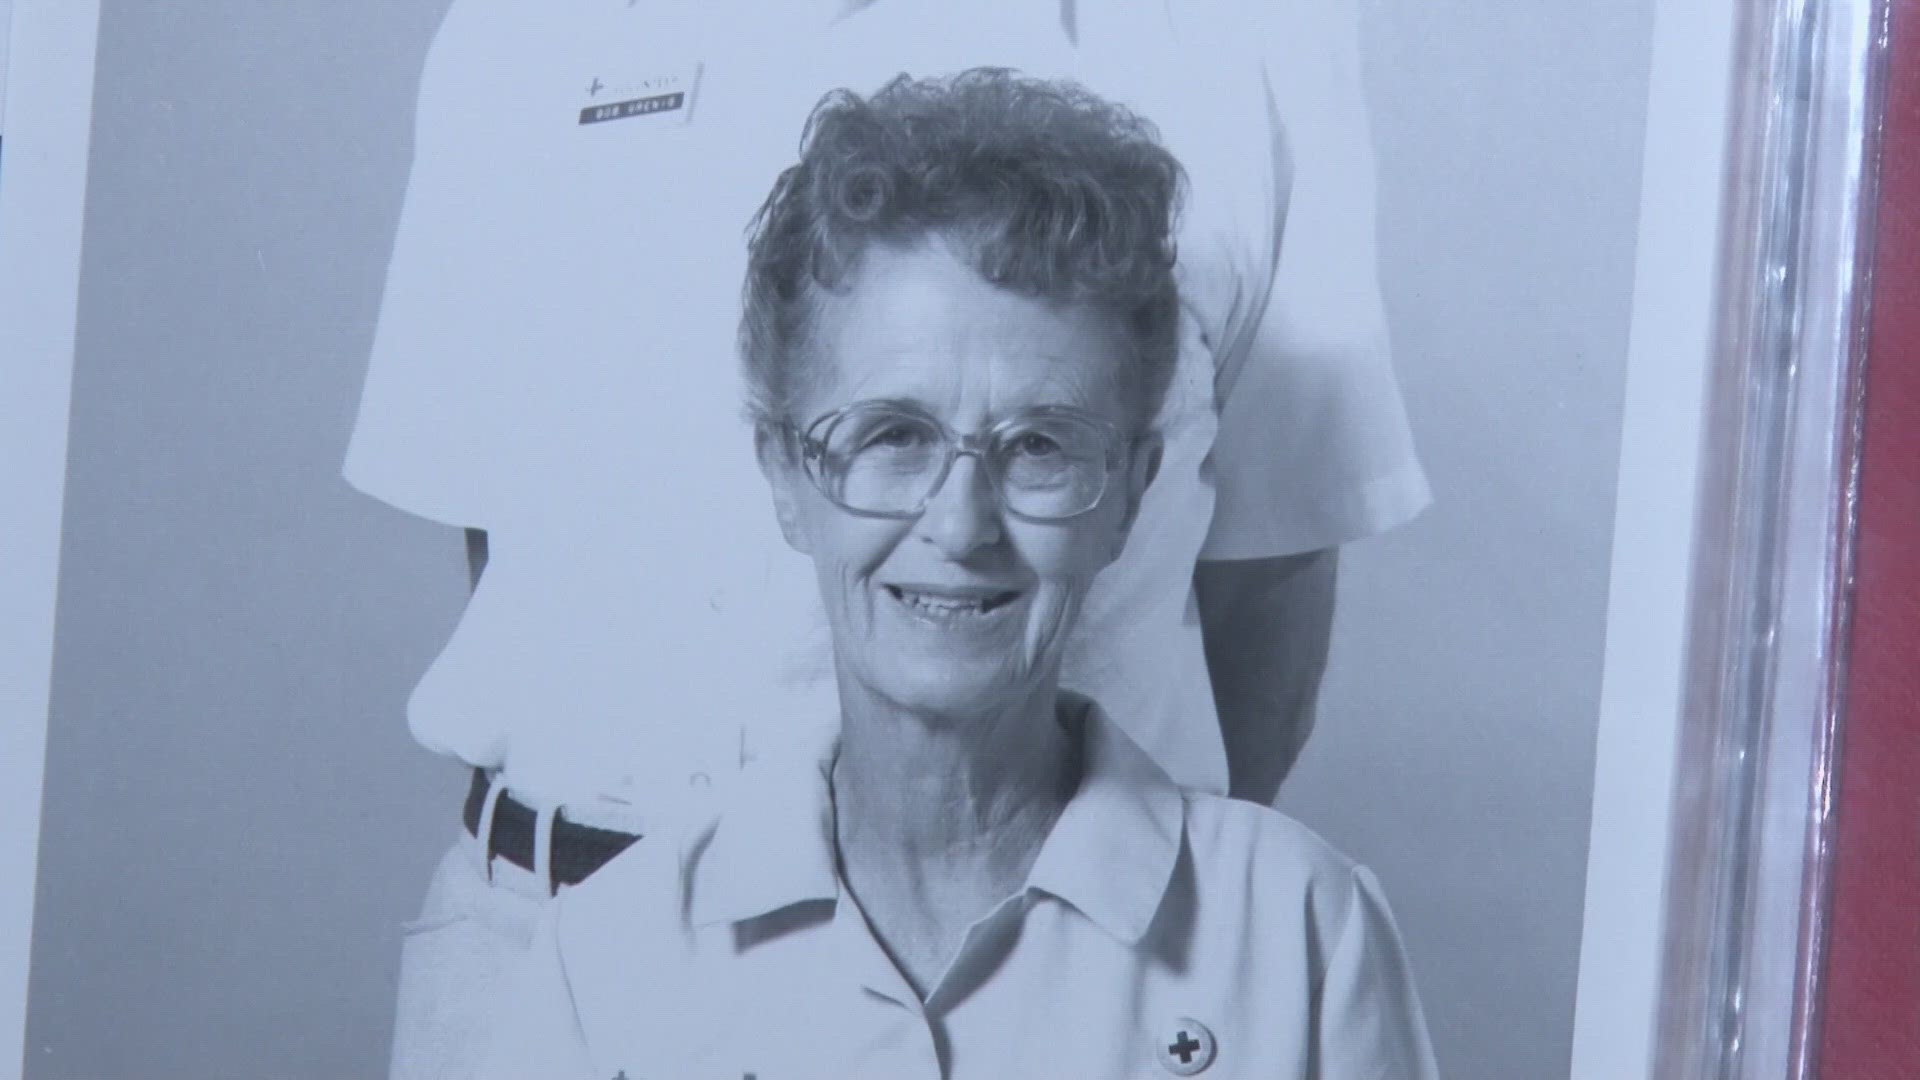 Betty spent 84 years working with the Red Cross, the longest tenured volunteer in the organization's history.